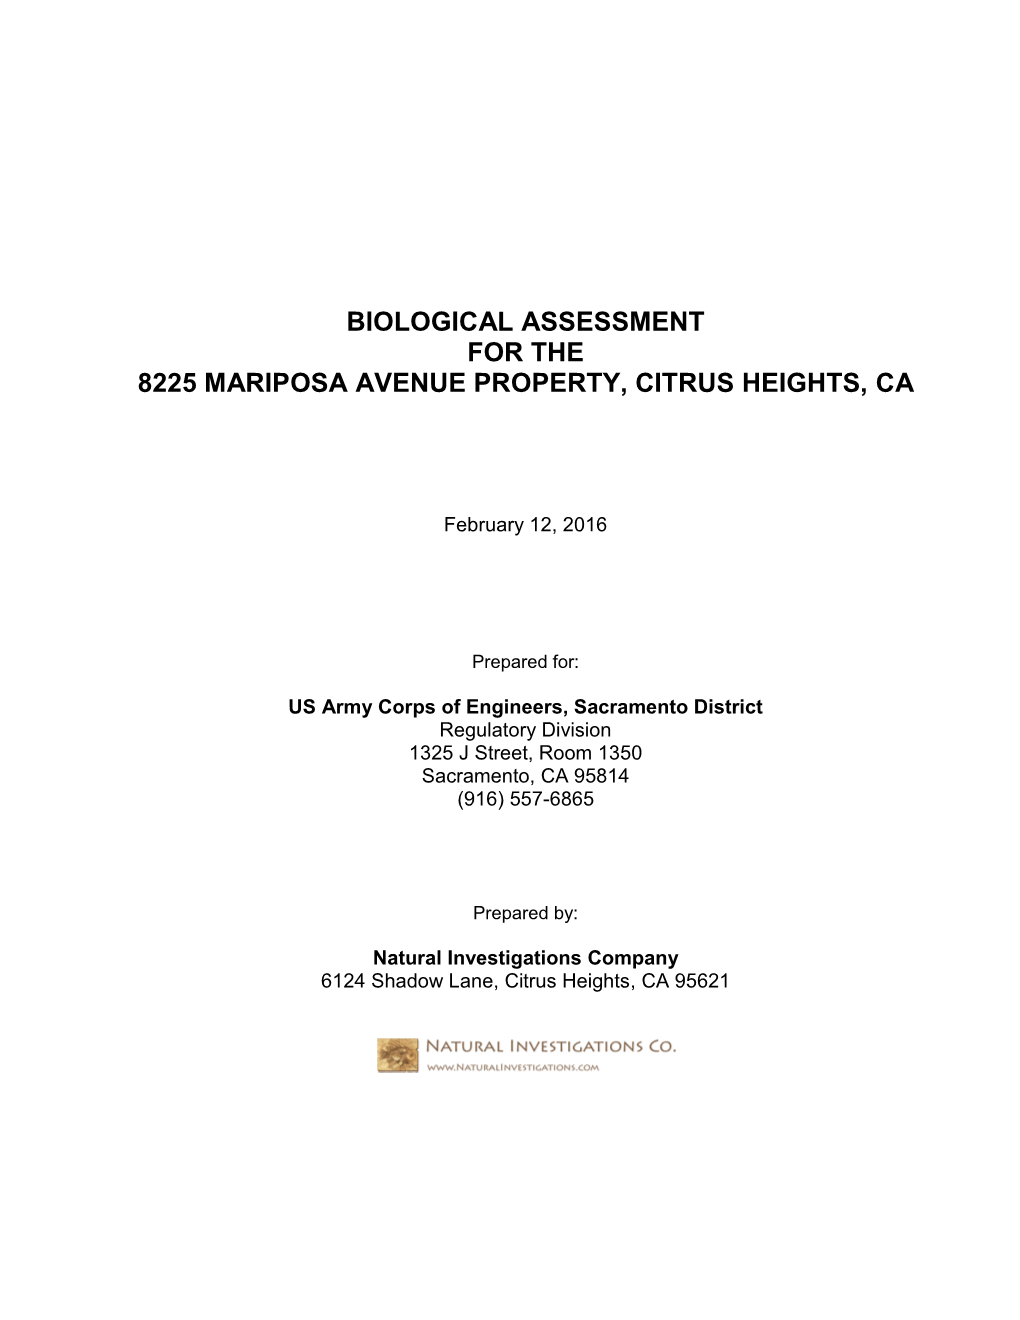 Biological Assessment for the 8225 Mariposa Avenue Property, Citrus Heights, Ca